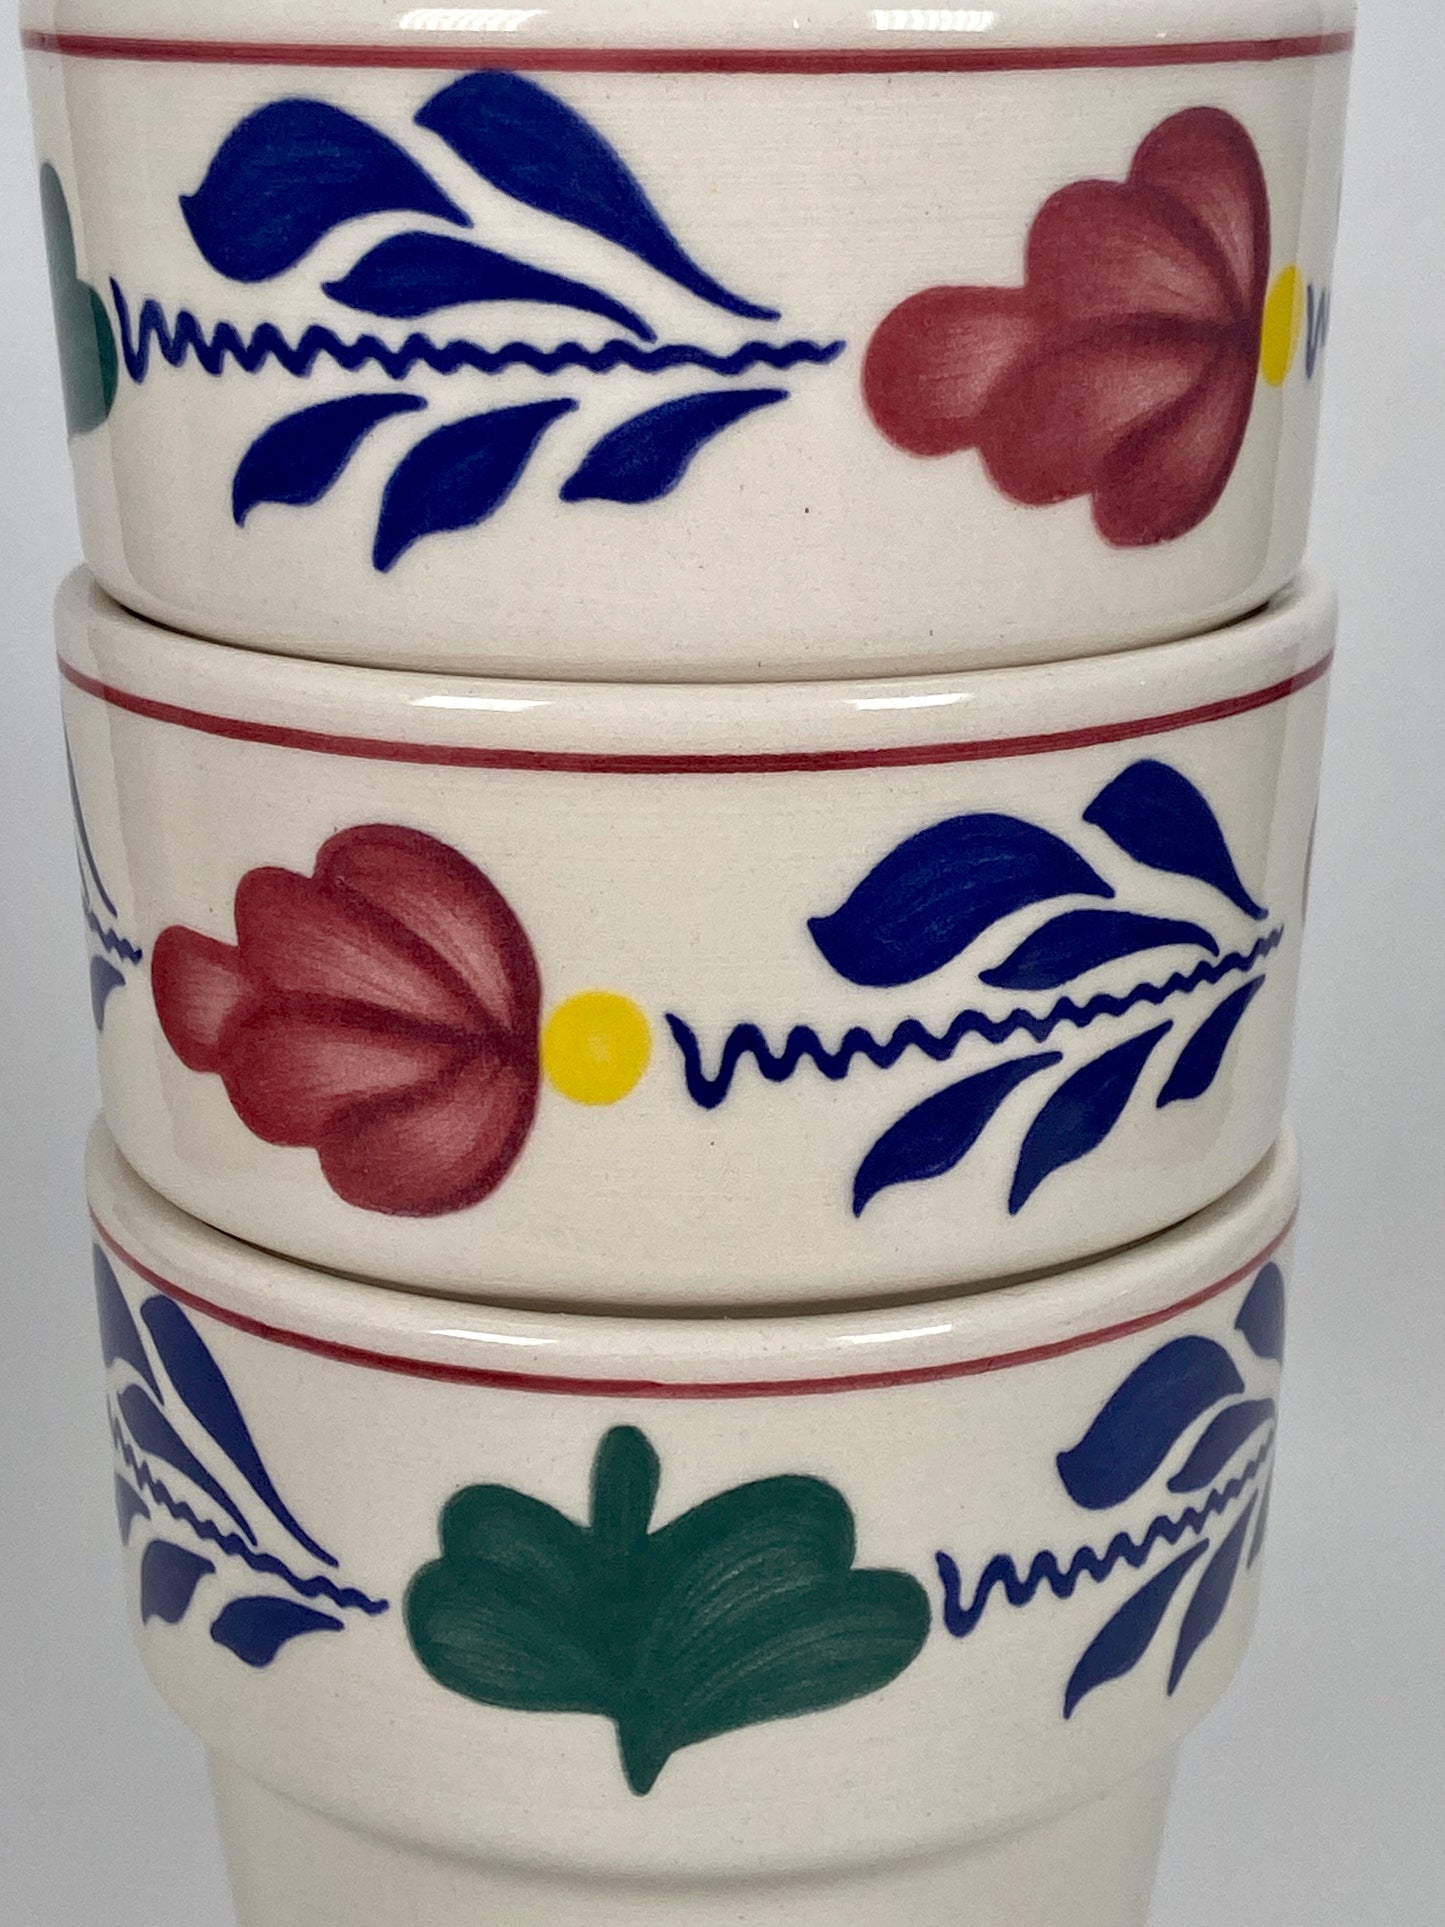 3 milk mugs showing Dutch Boerenbont pattern with blue red and yellow leaves - Big Bite Dutch Treats